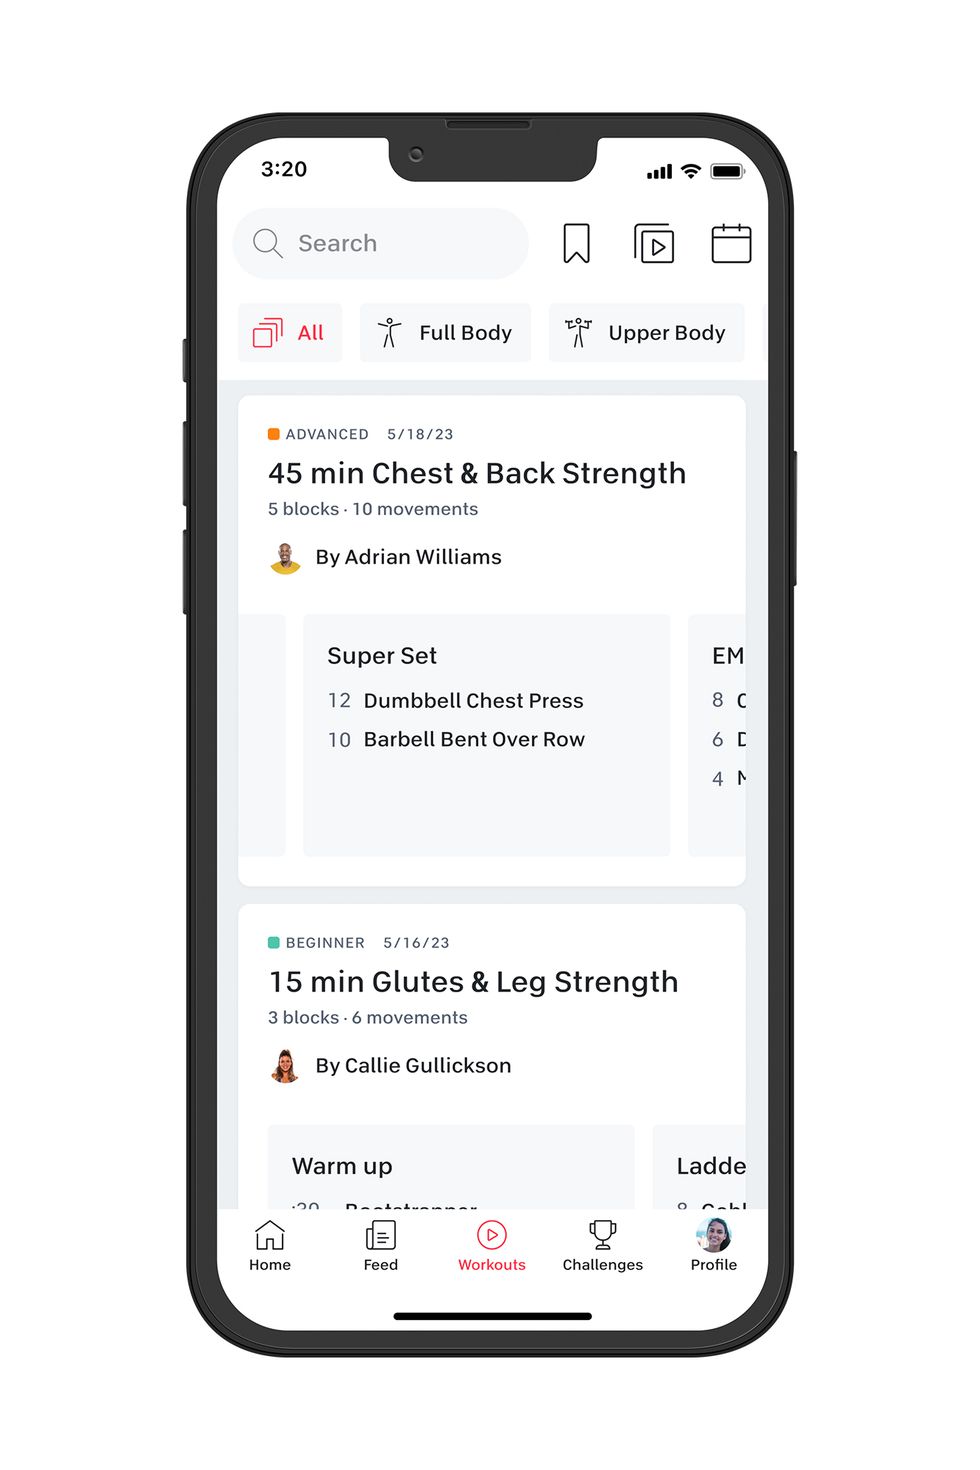 45 min chest and back strength workout on peloton gym app